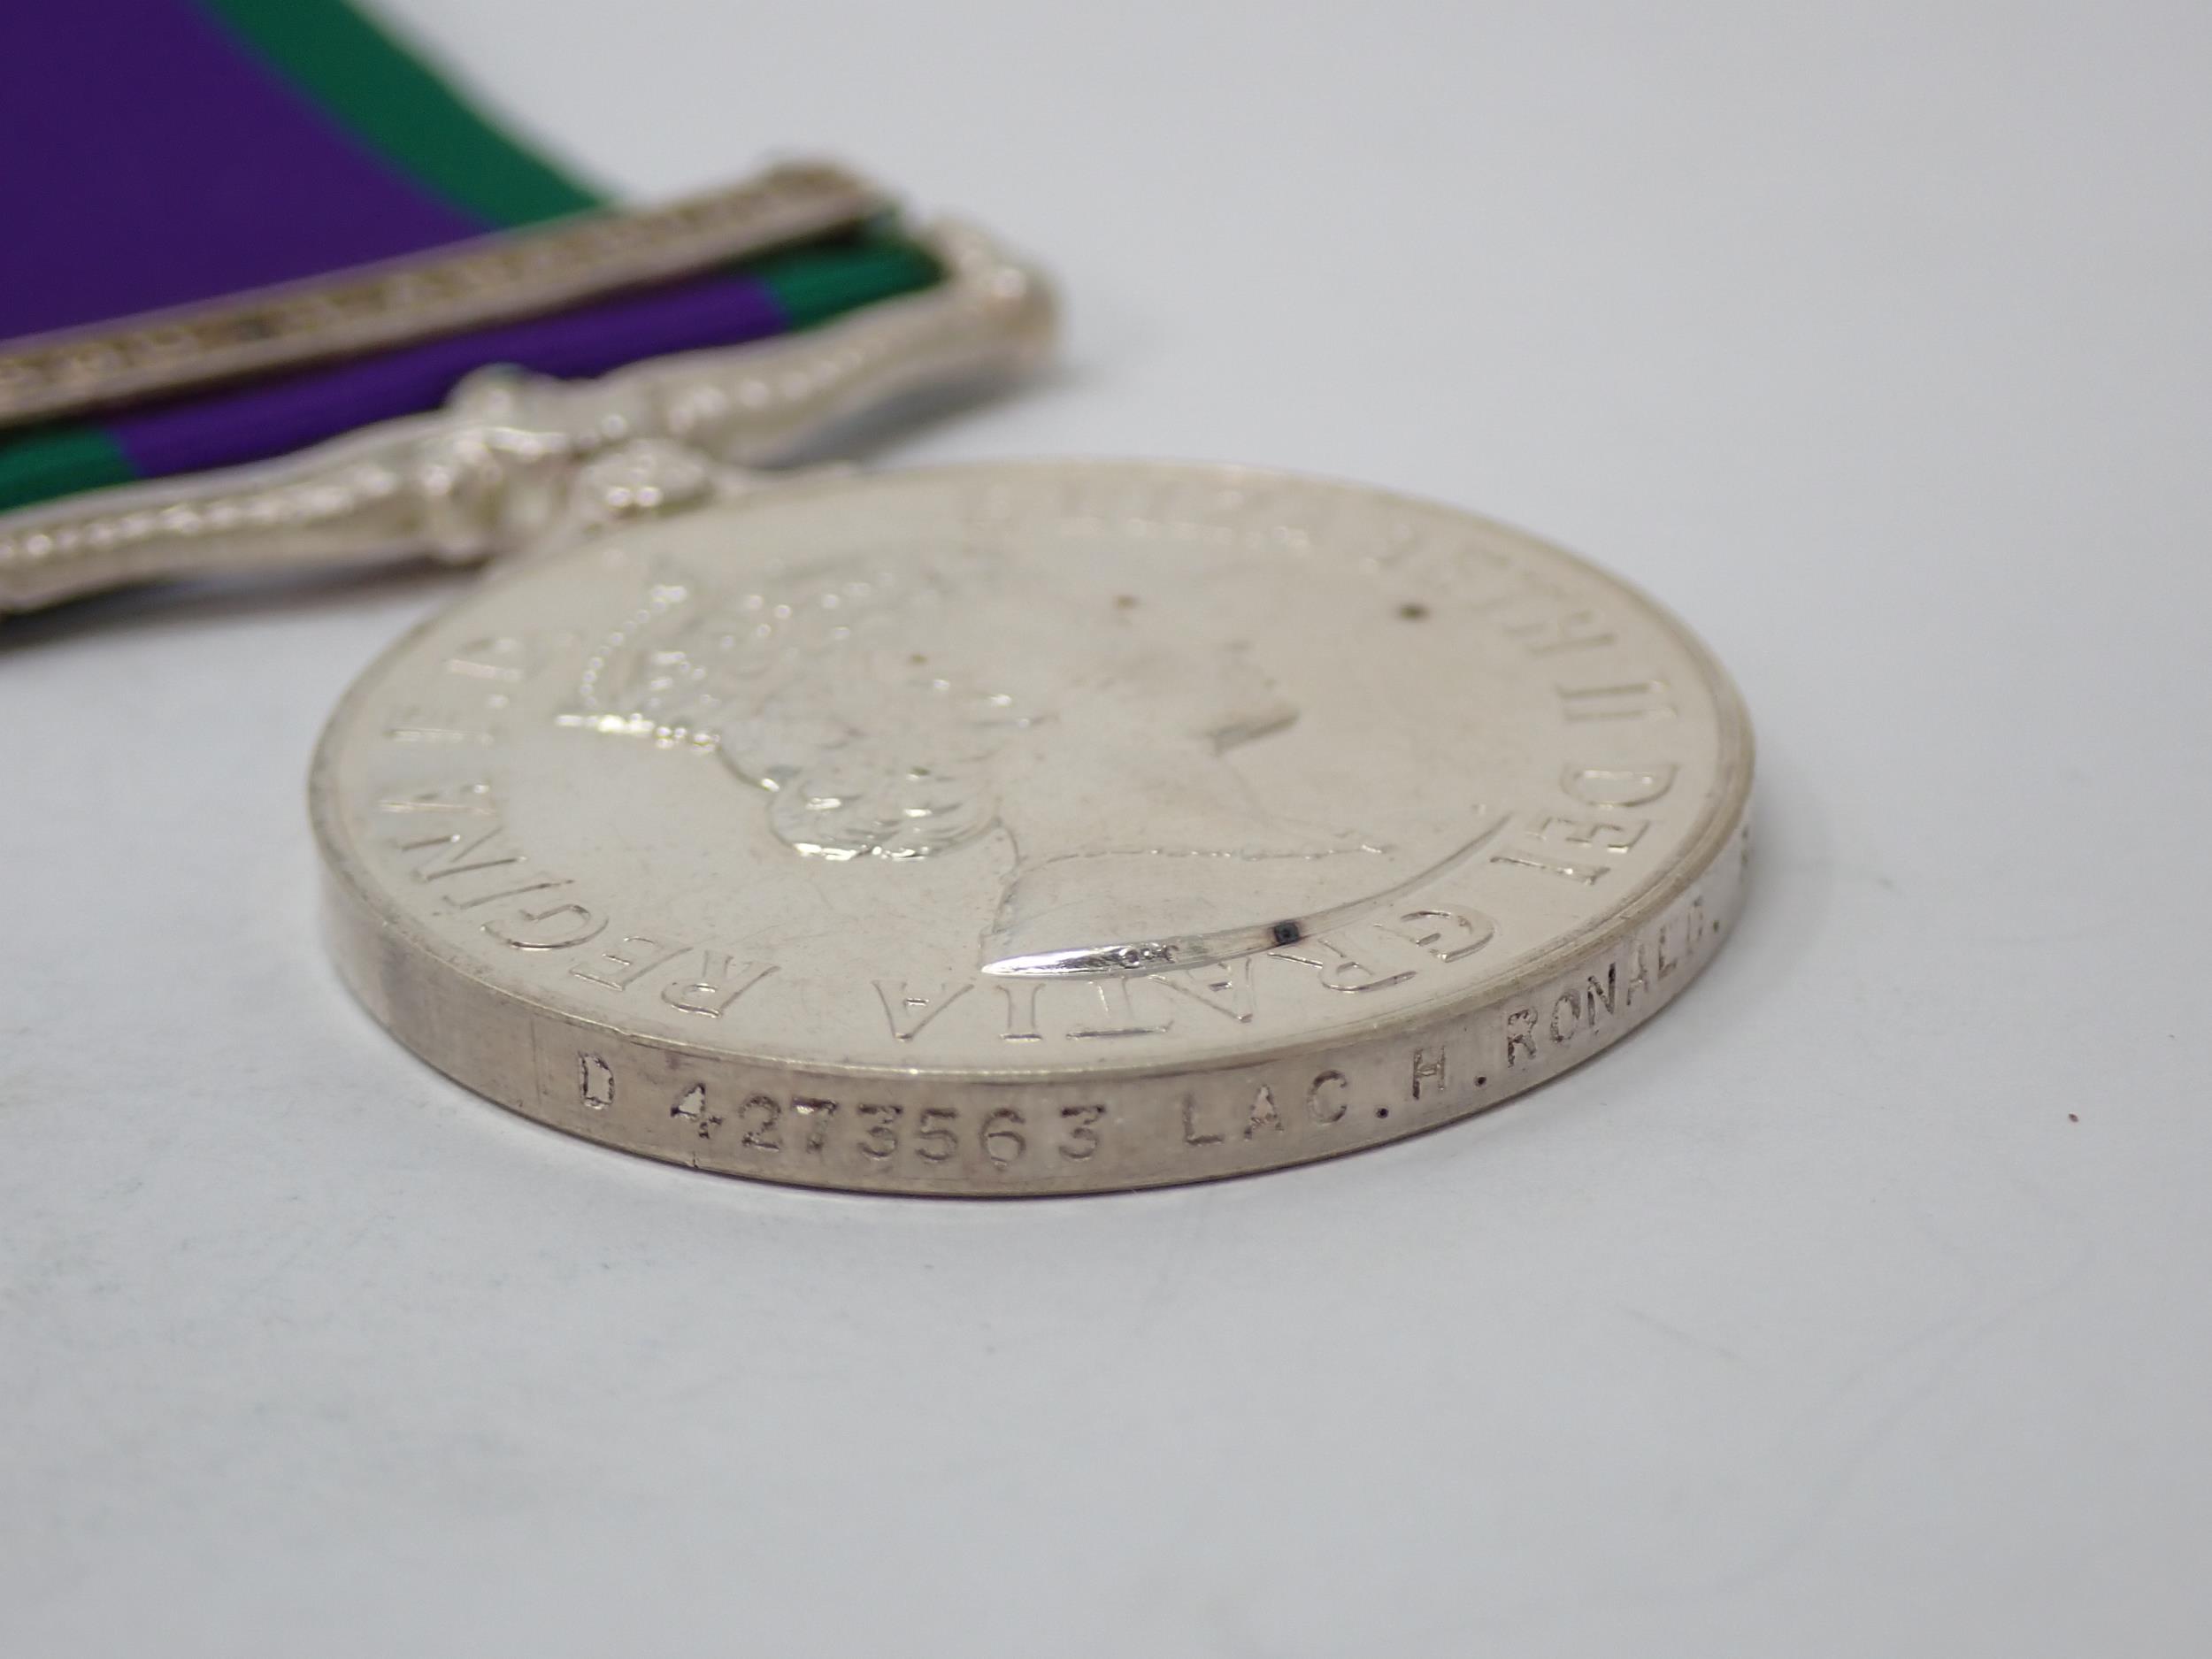 Campaign Service Medal with South Arabia Bar to 4273563 LAC H. Ronald, Royal Air Force - Image 3 of 4